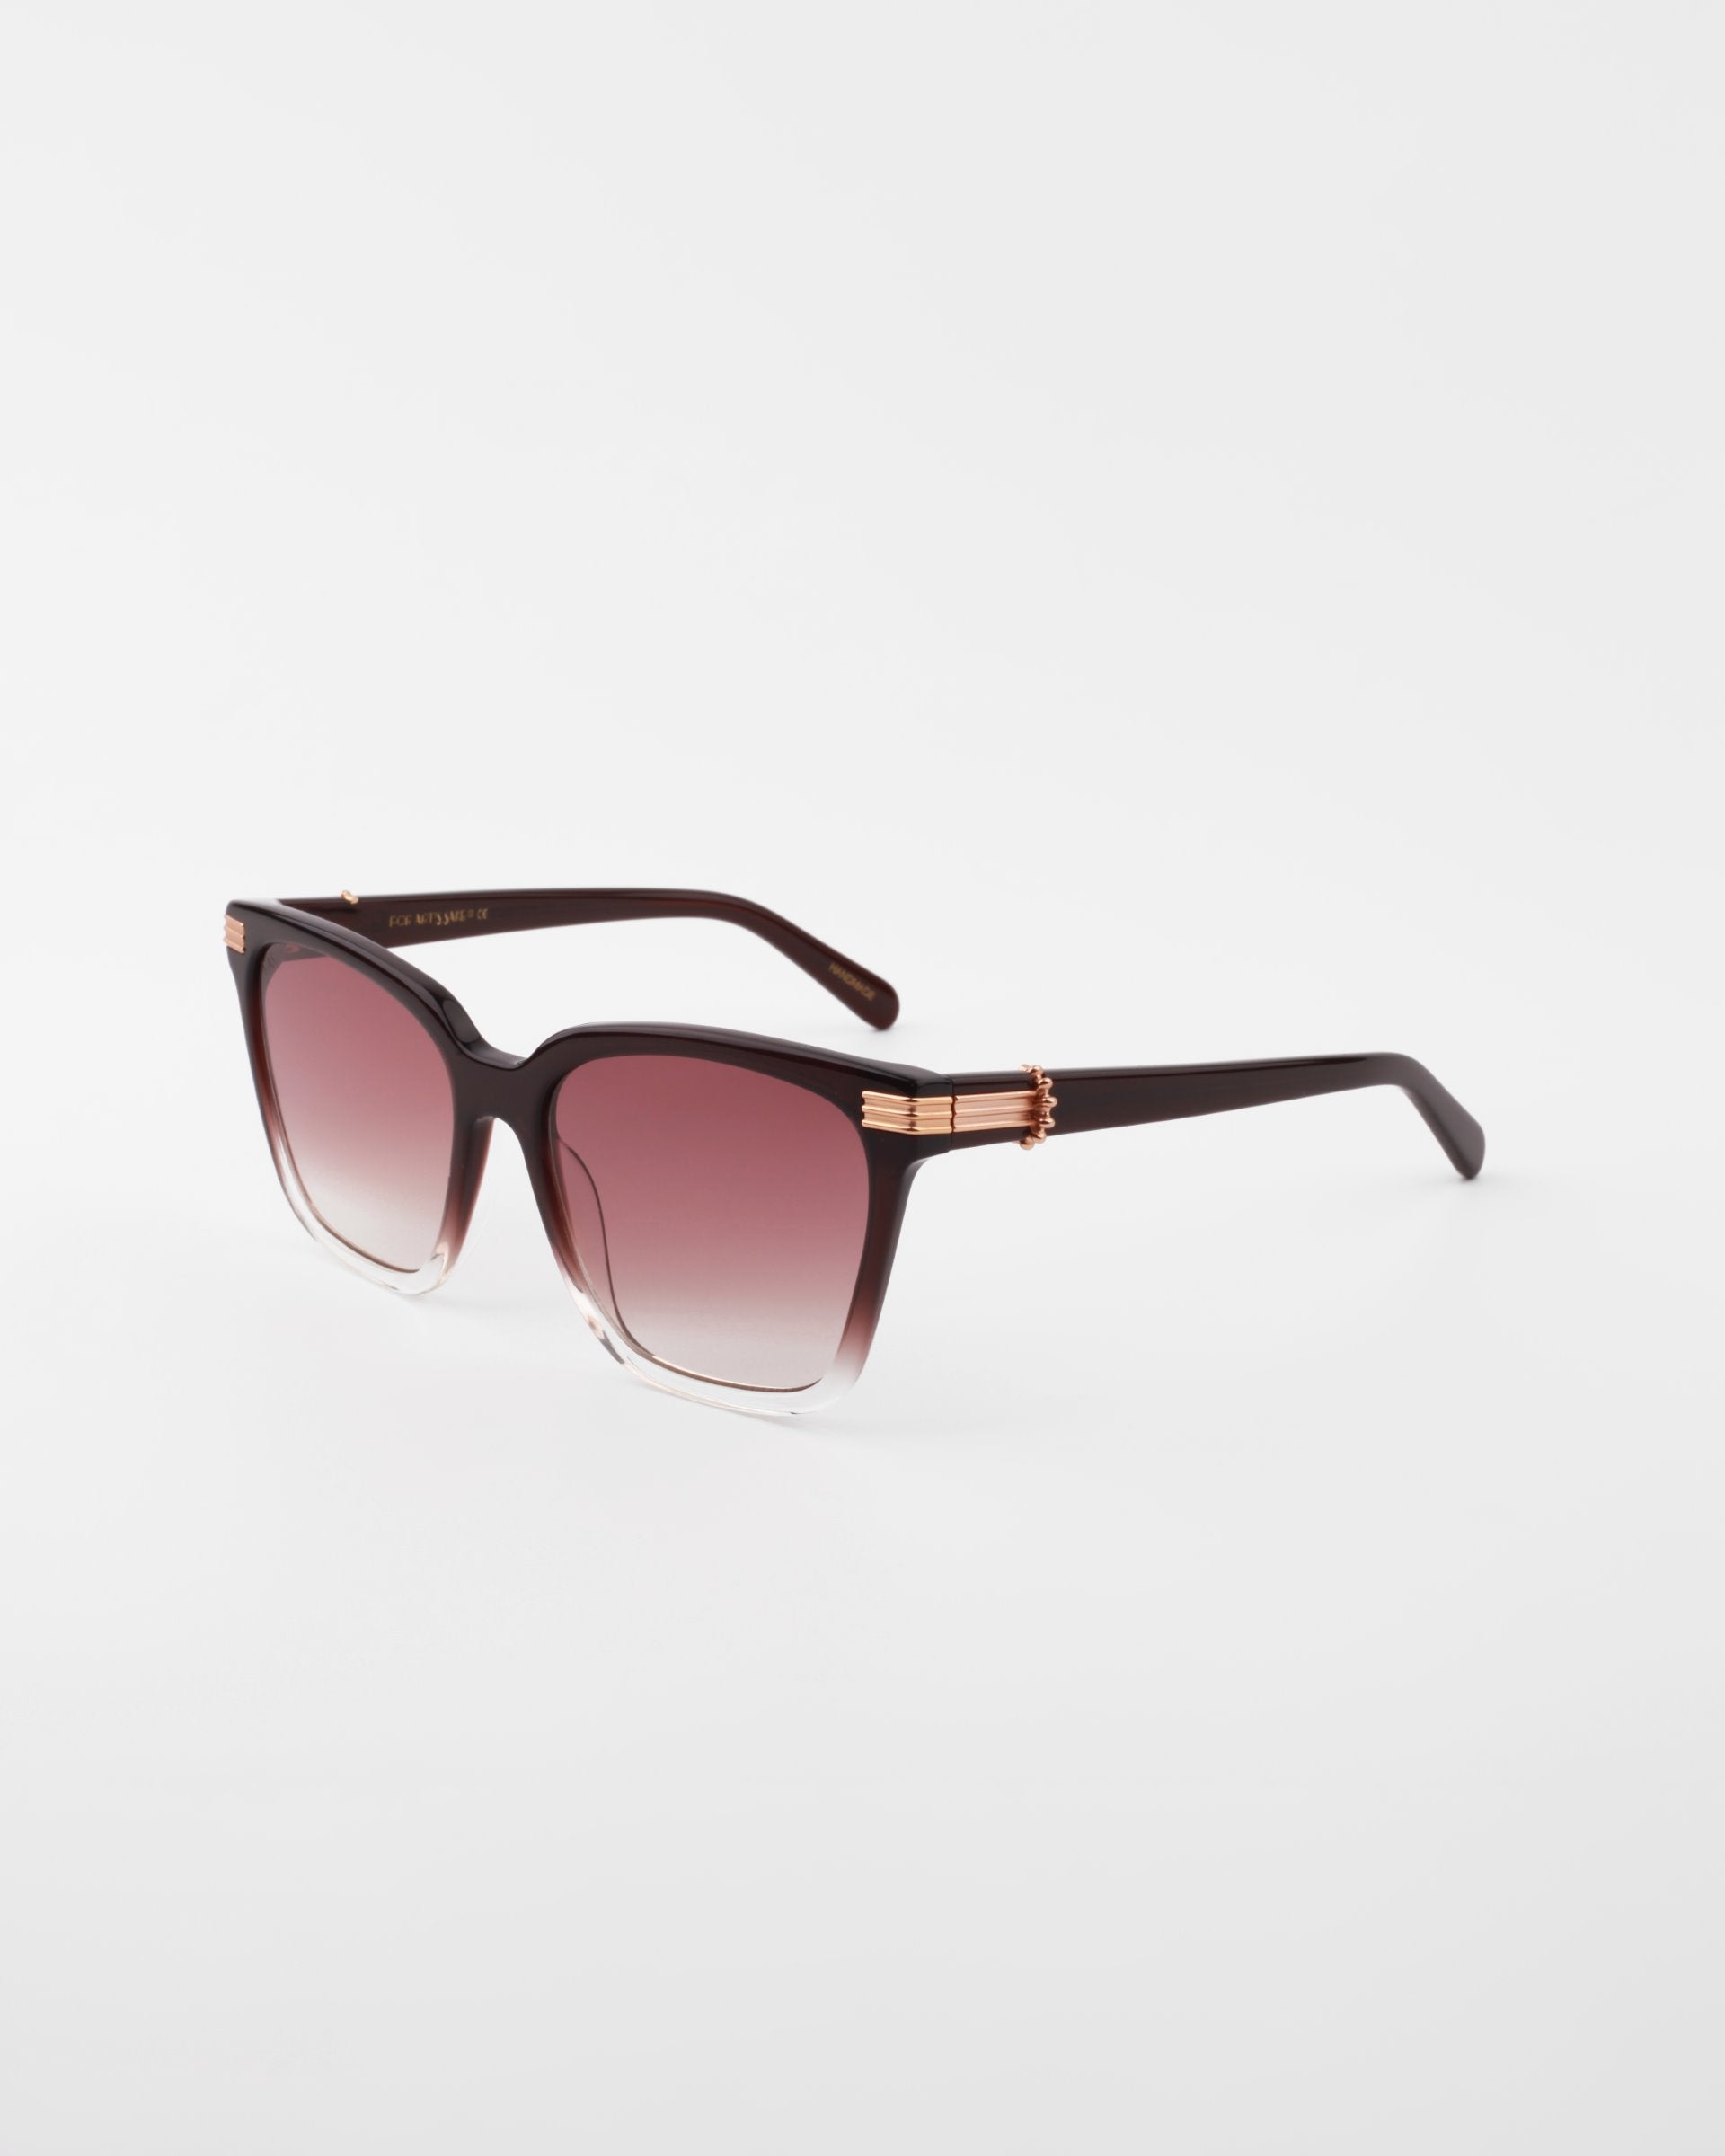 A pair of stylish maroon square-shaped sunglasses with gradient UV-protected lenses. The Gaia by For Art’s Sake® glasses feature 18-karat gold-plated temples and dark-colored arms. Handmade acetate sunglasses that boast a sleek, modern design, set against a plain white background.